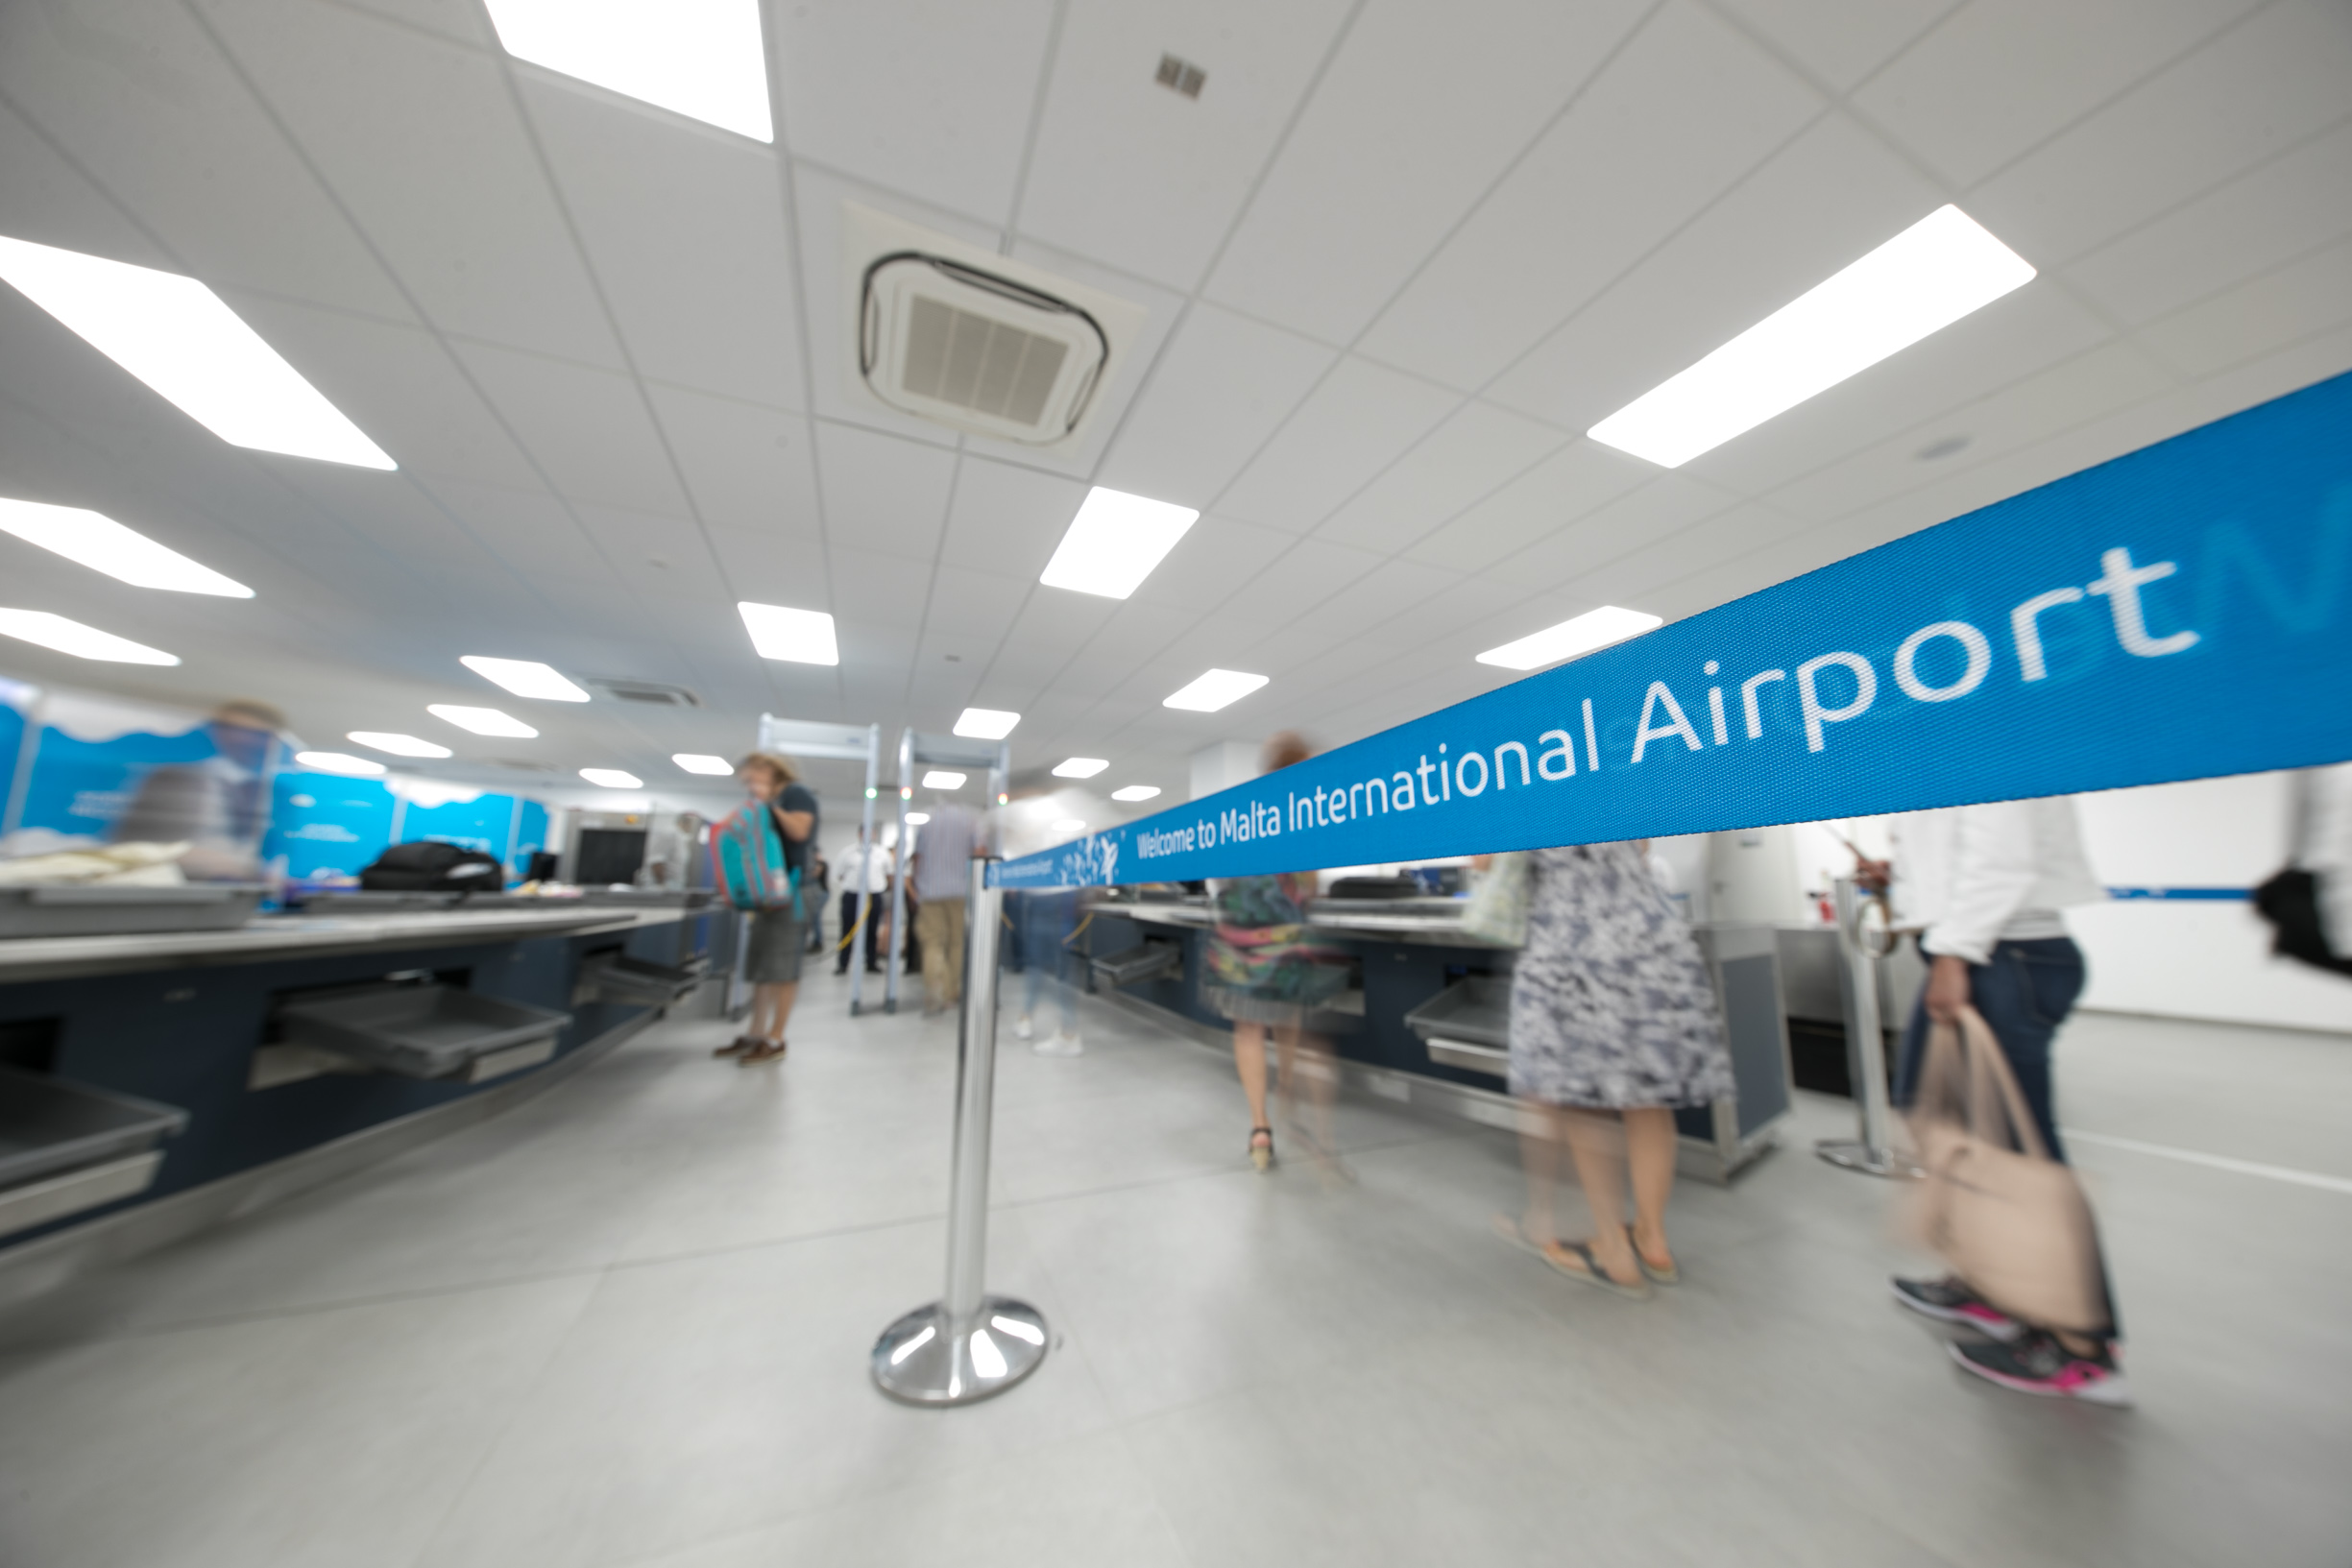 Malta’s airport sees 2.5 million passengers in 2021 marking 35% recovery of 2019 traffic